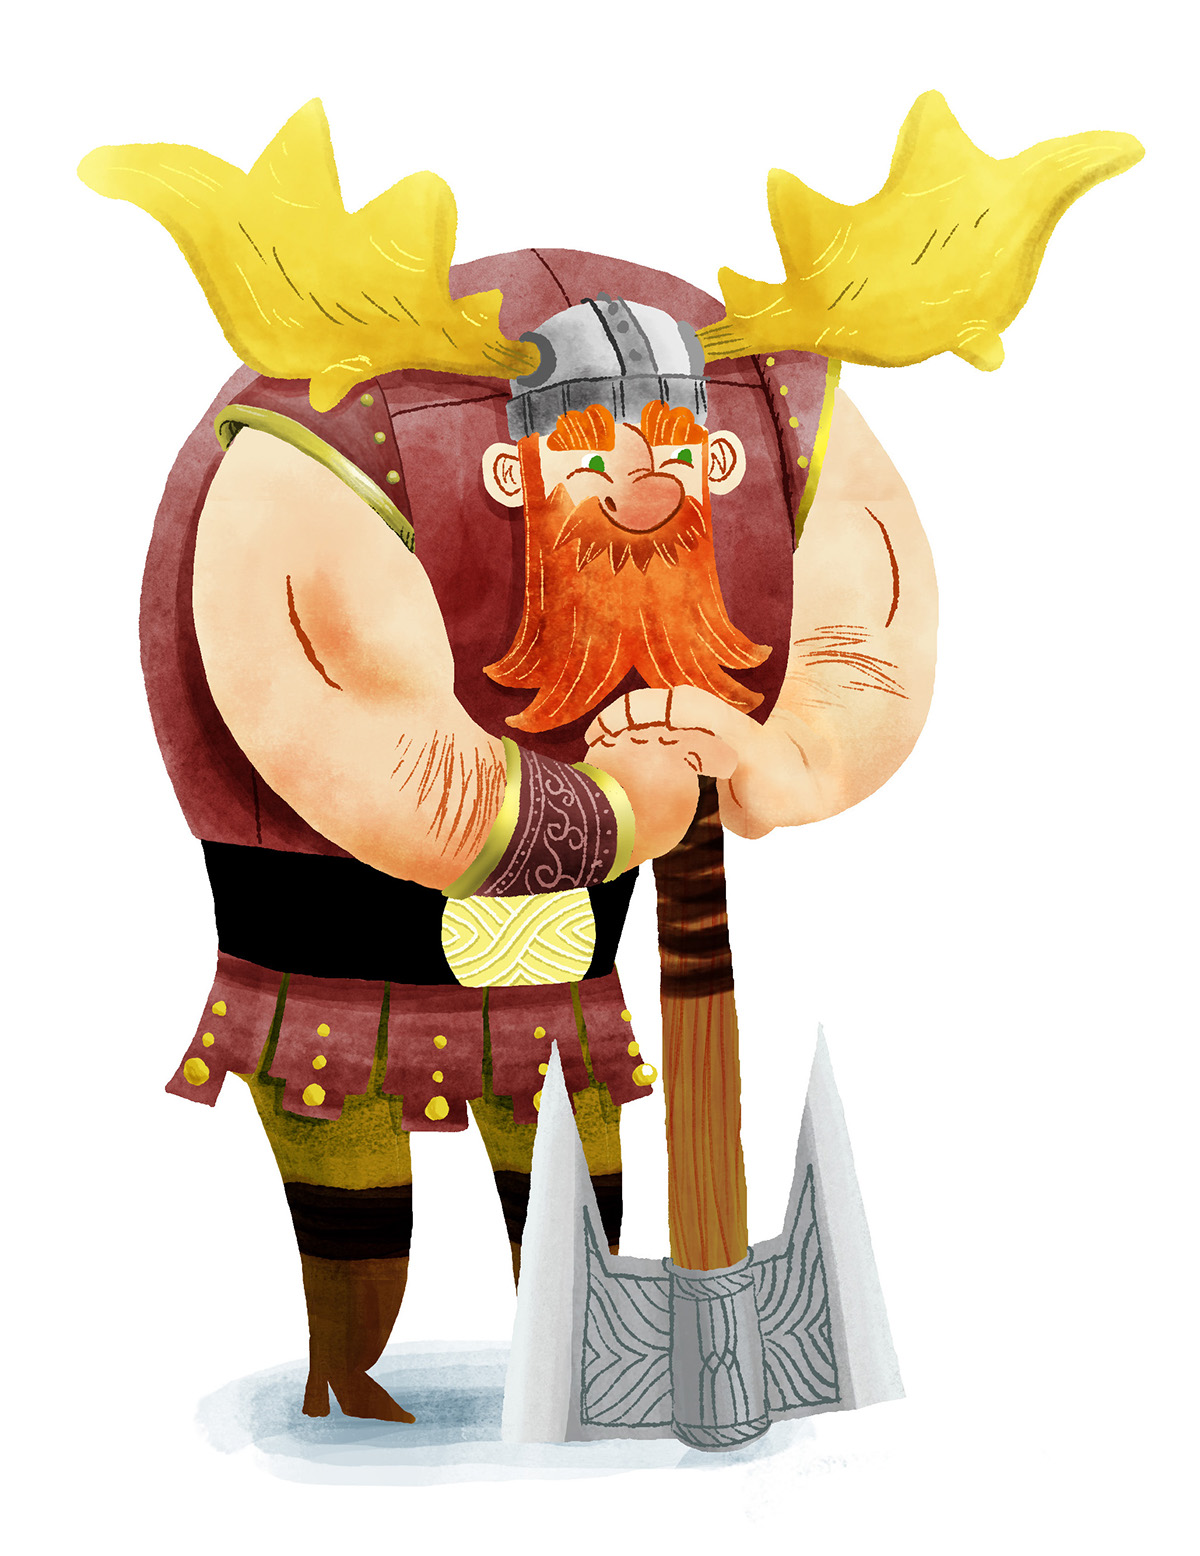 viking vikings chickens peasents witch medium sorceress Magic   Spells alchemy Alchemist goblin guards goblin party cave